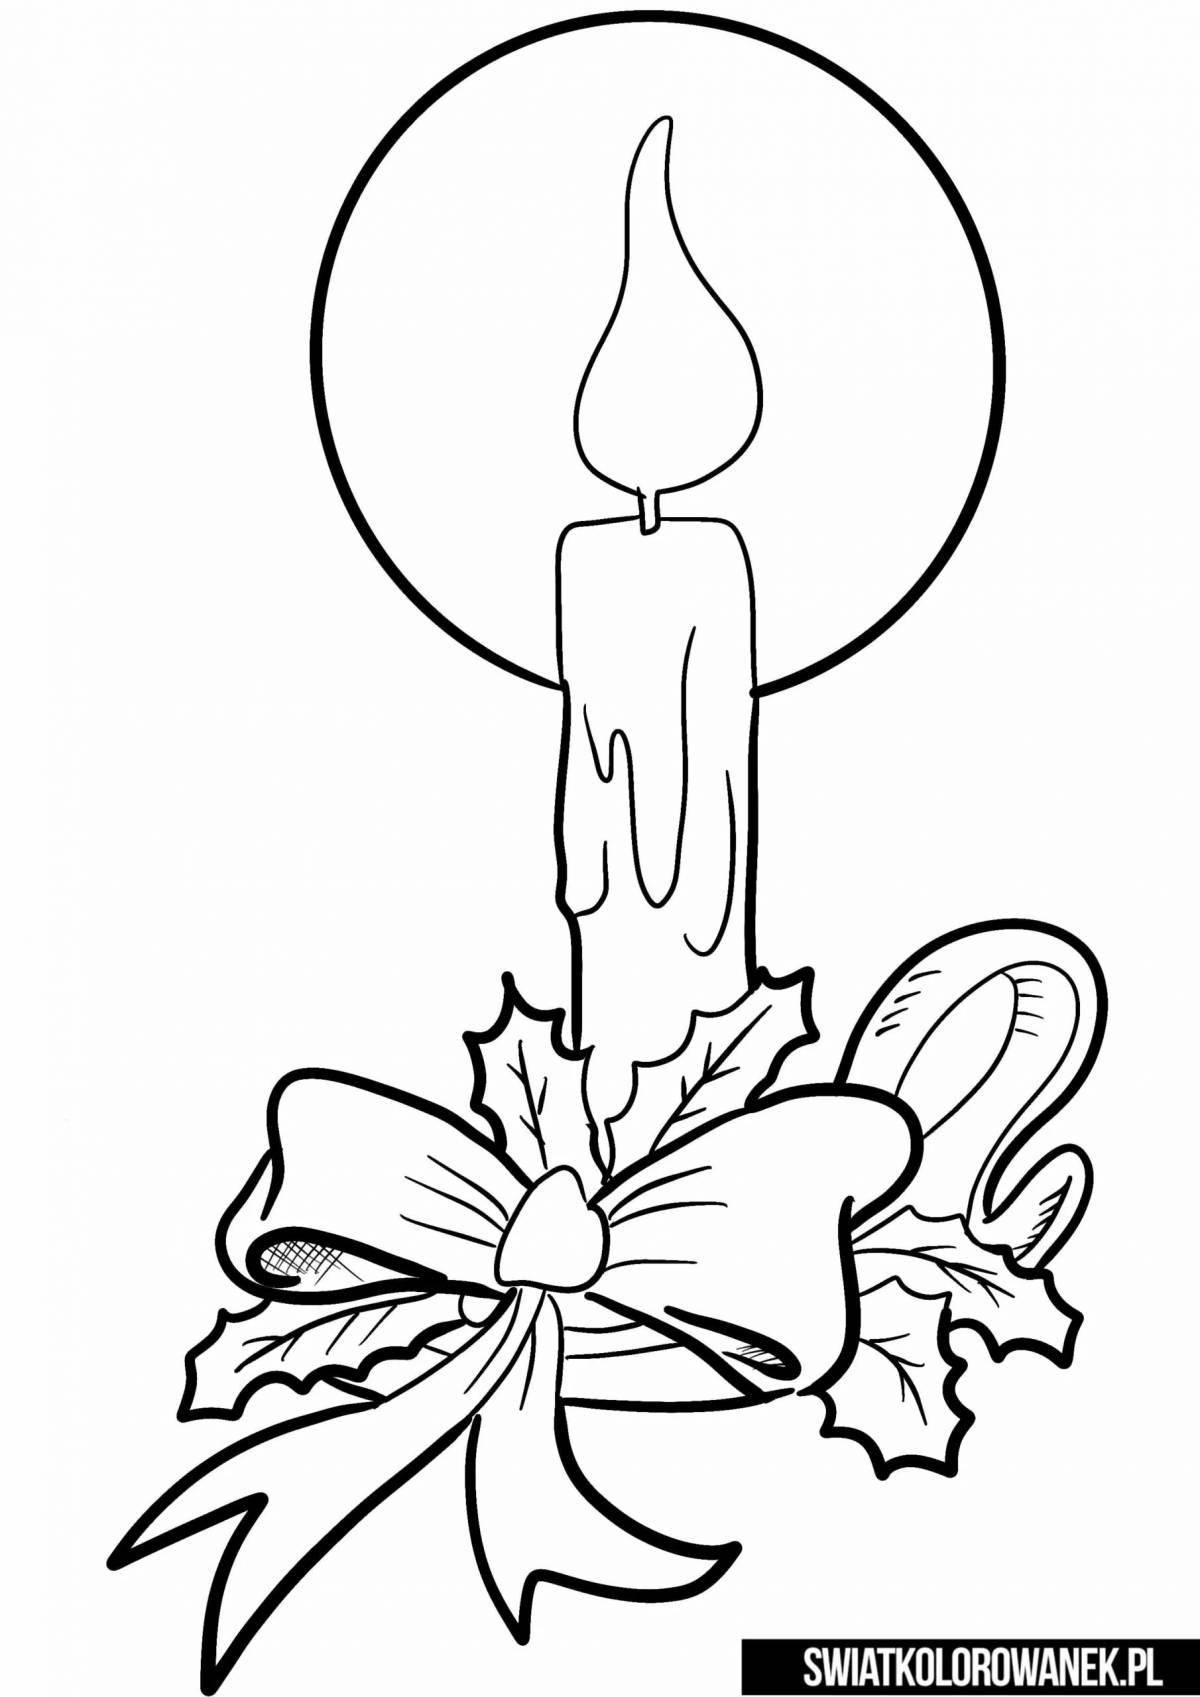 Awesome christmas candle coloring page